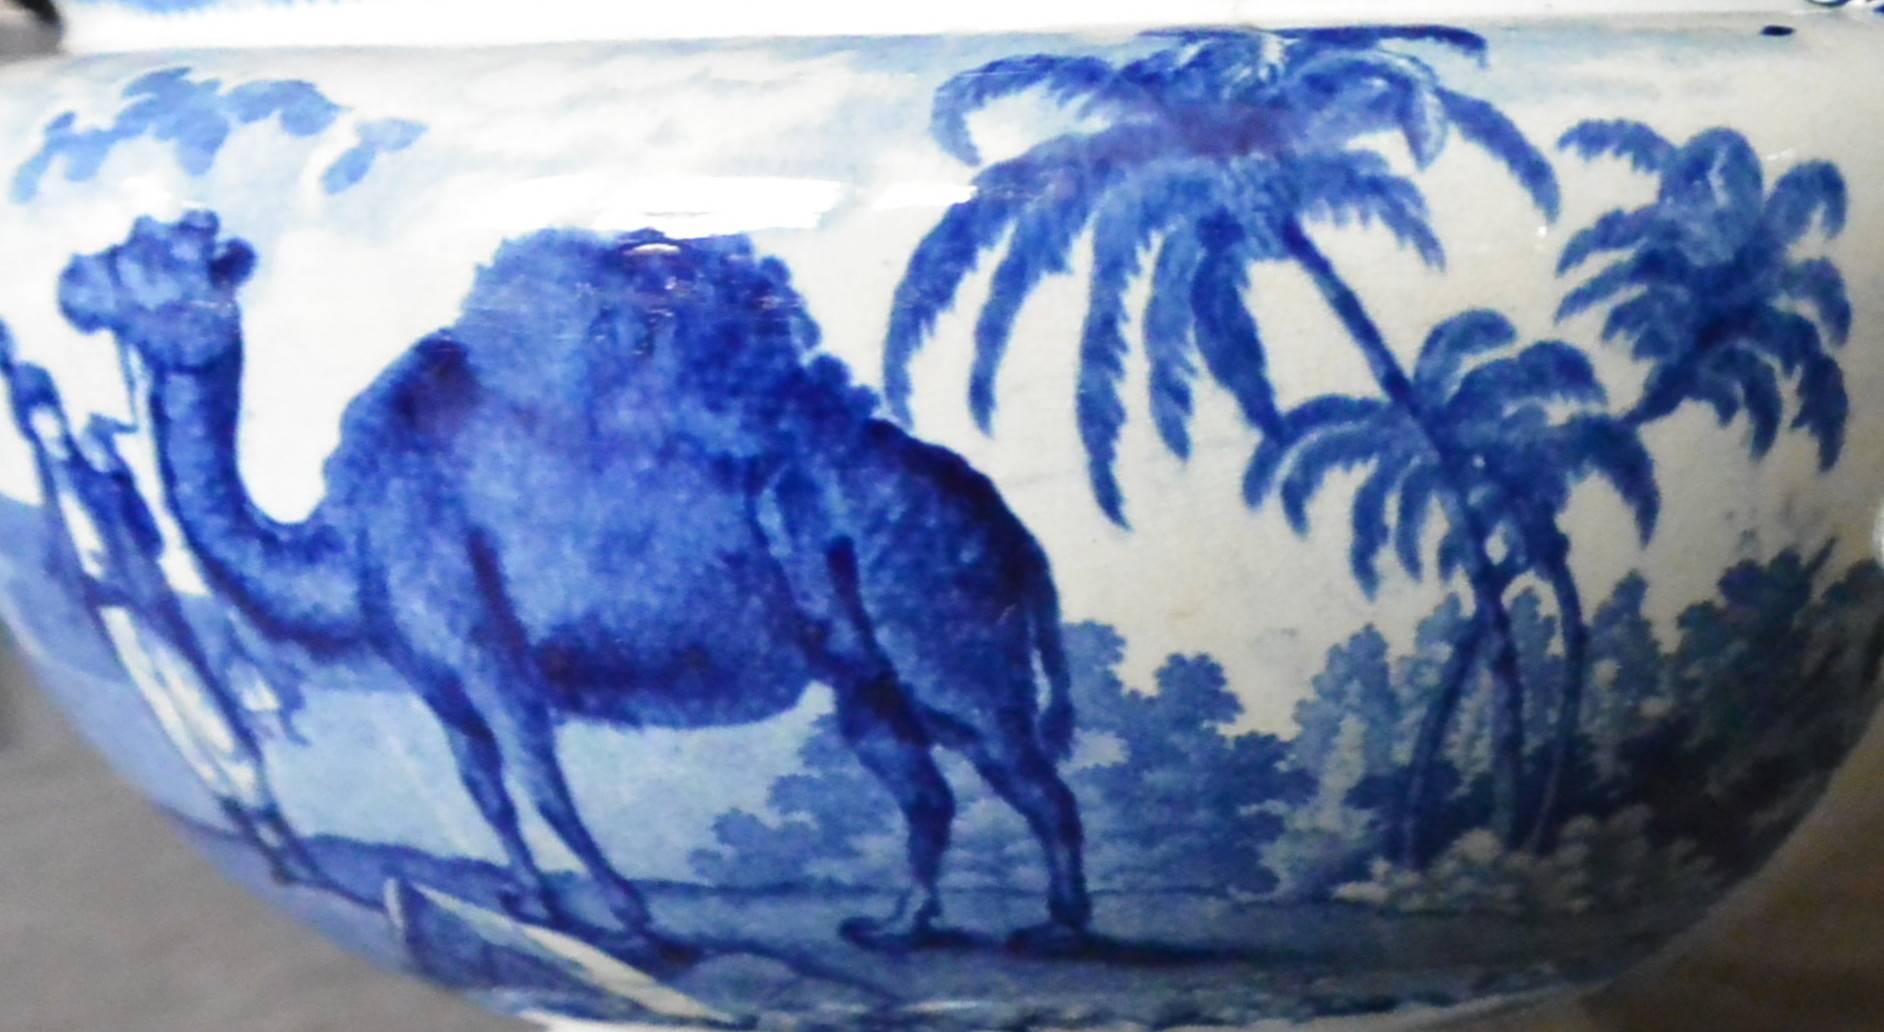 Antique blue and white handled open serving bowl with Arabian camels, palm trees and men in Turkish costume in a landscaped English park. Enoch Wood & Sons, England, circa 1825.
Dimension: 15.75